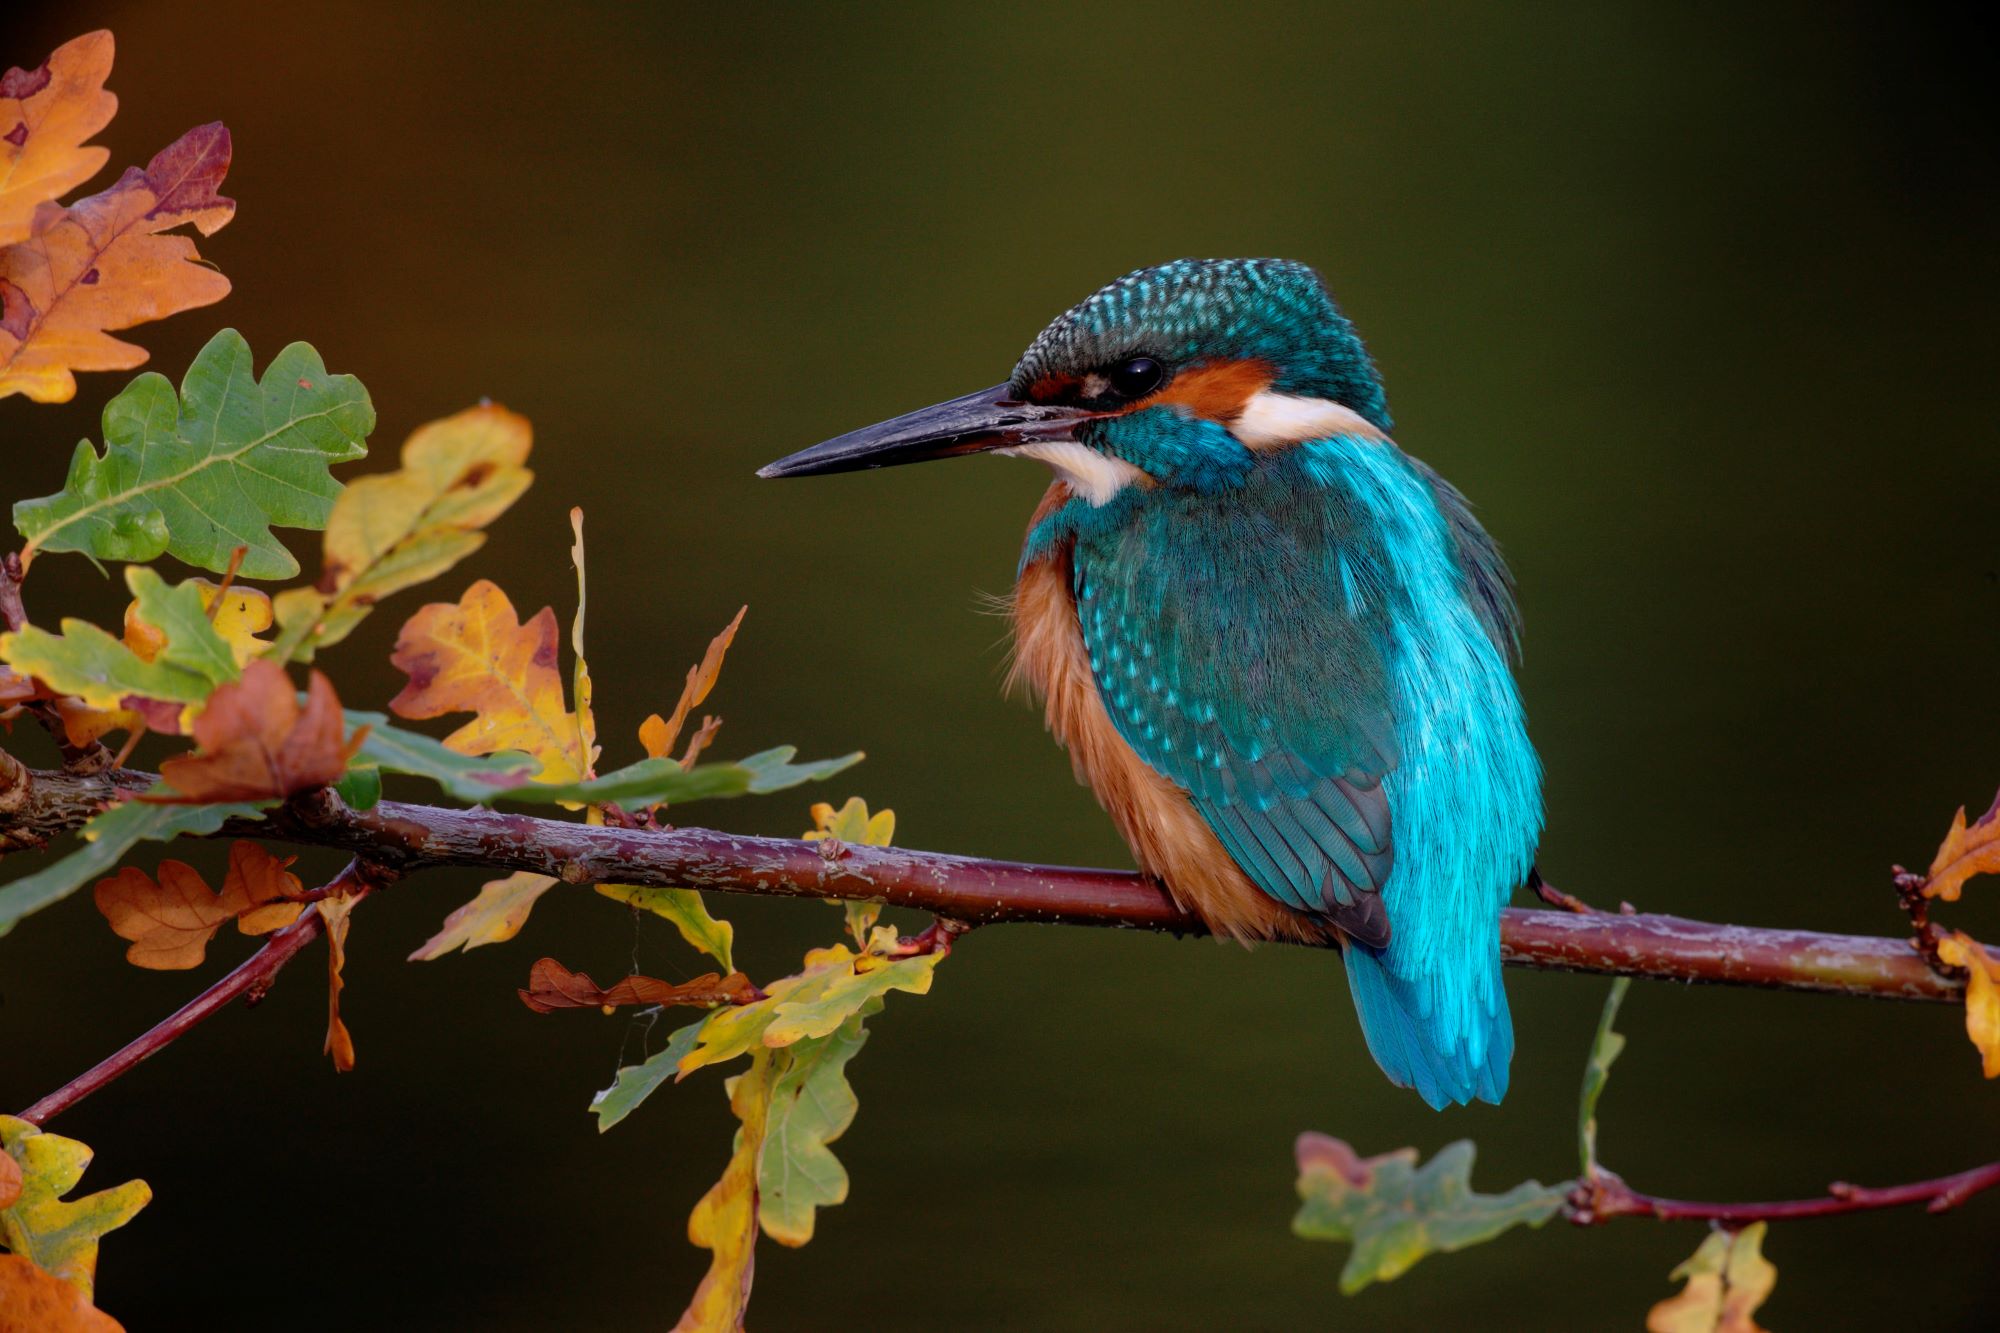 Kingfisher with bright blue and orange plumage sitting on a tree branch